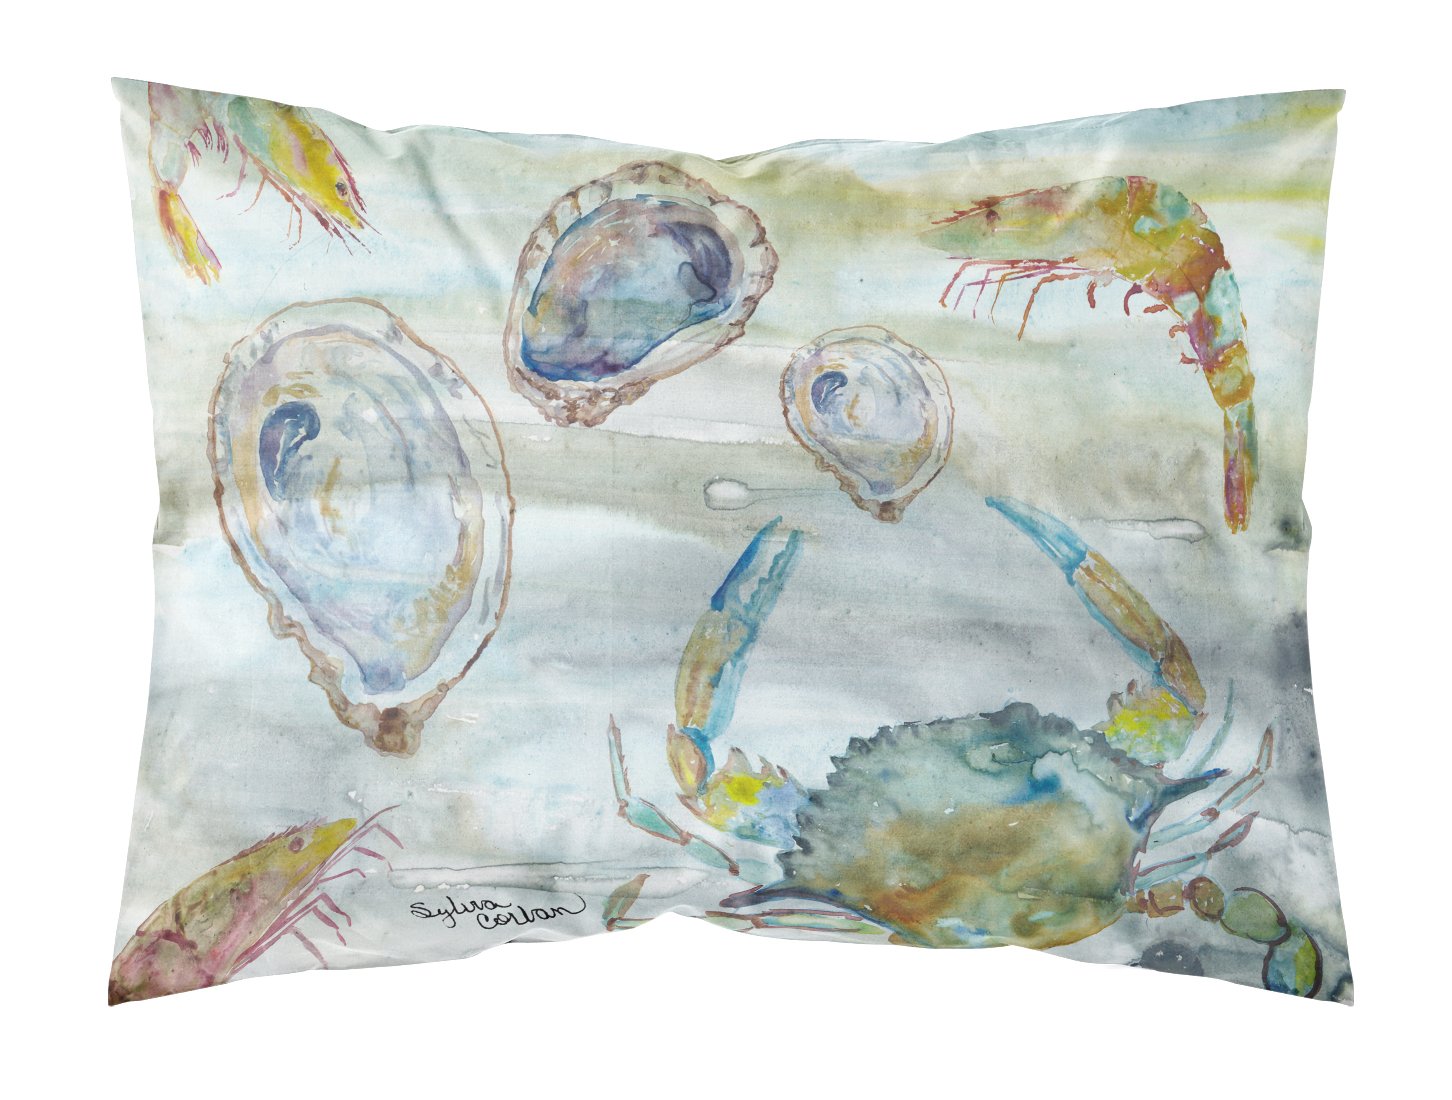 Crab, Shrimp and Oyster Watercolor Fabric Standard Pillowcase SC2010PILLOWCASE by Caroline's Treasures